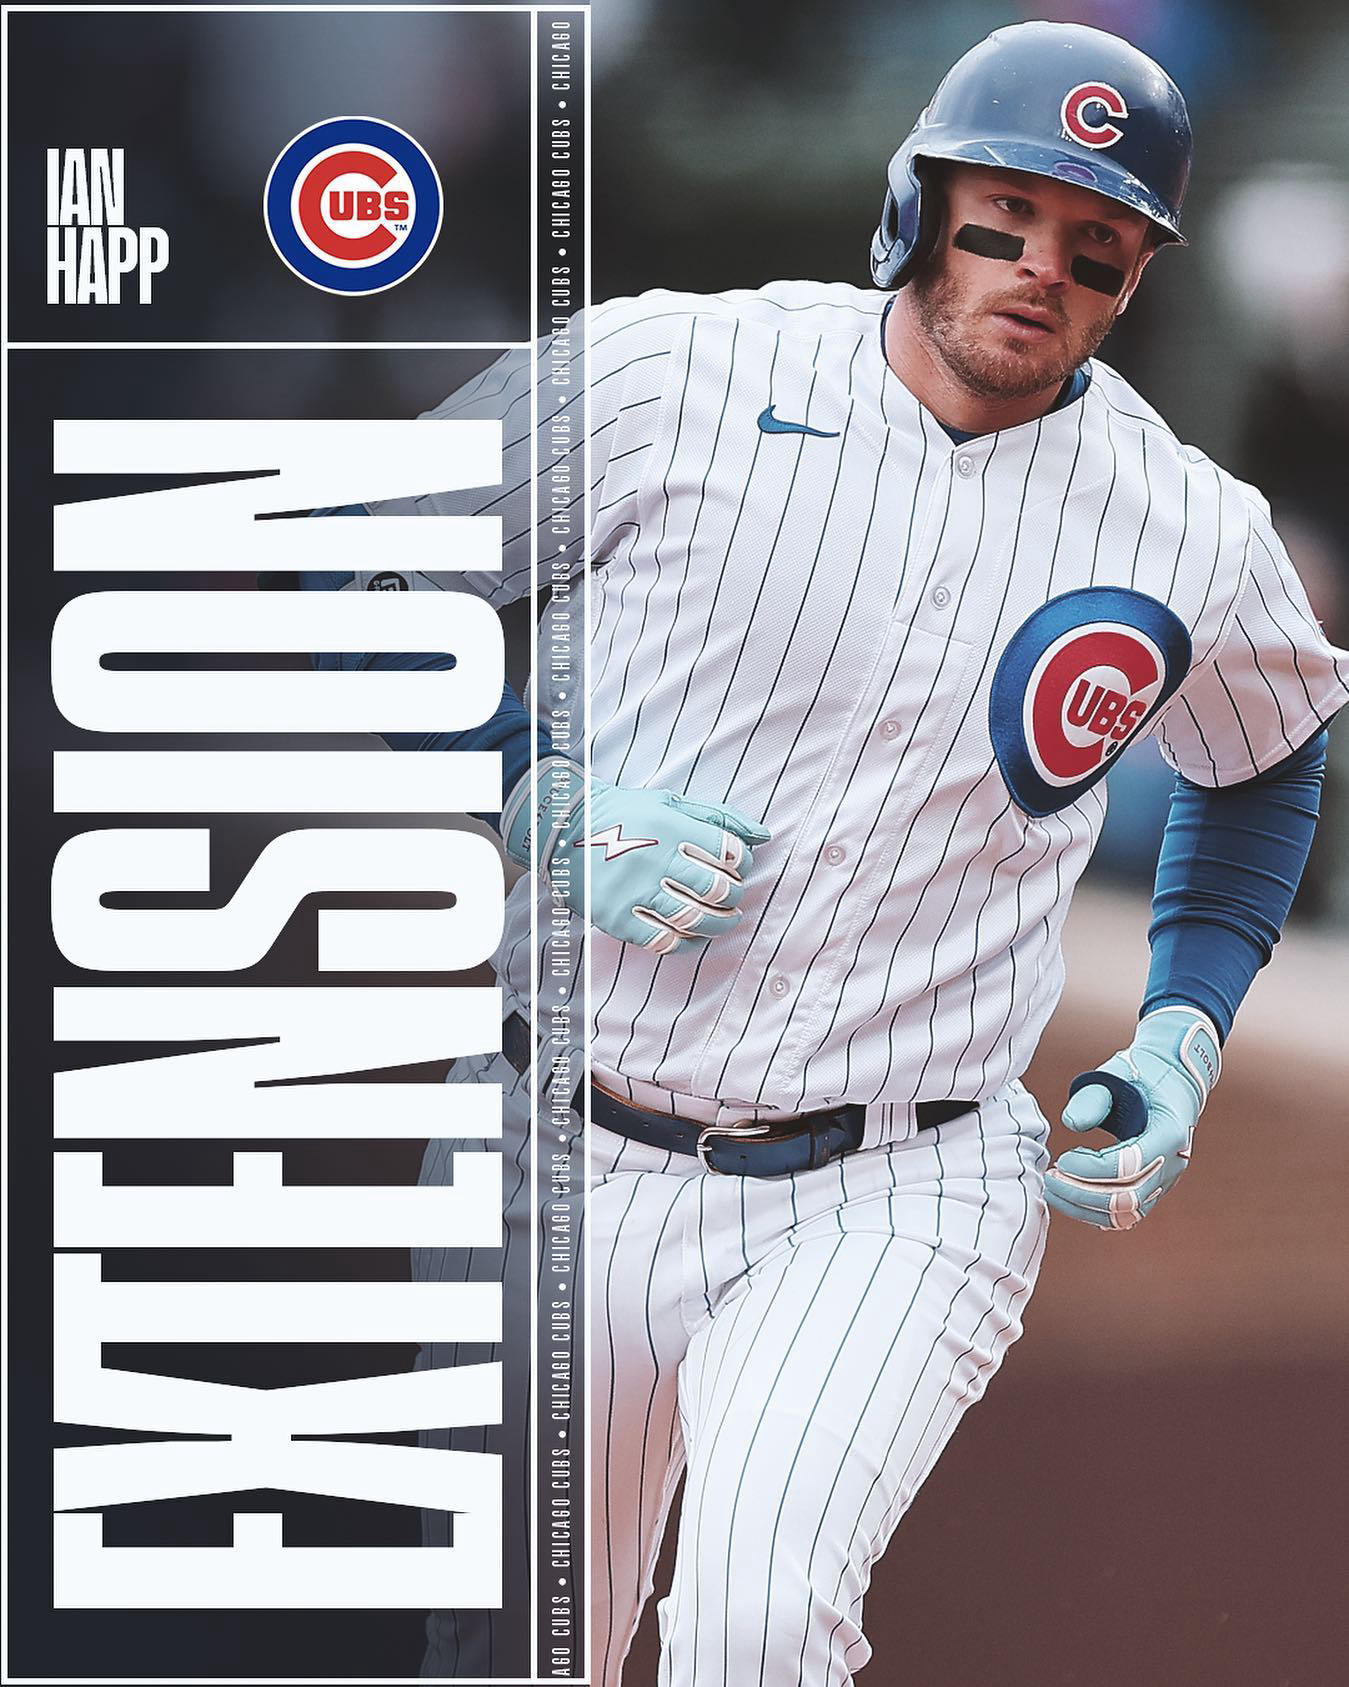 #Cubs, Ian Happ agree to three-year extension